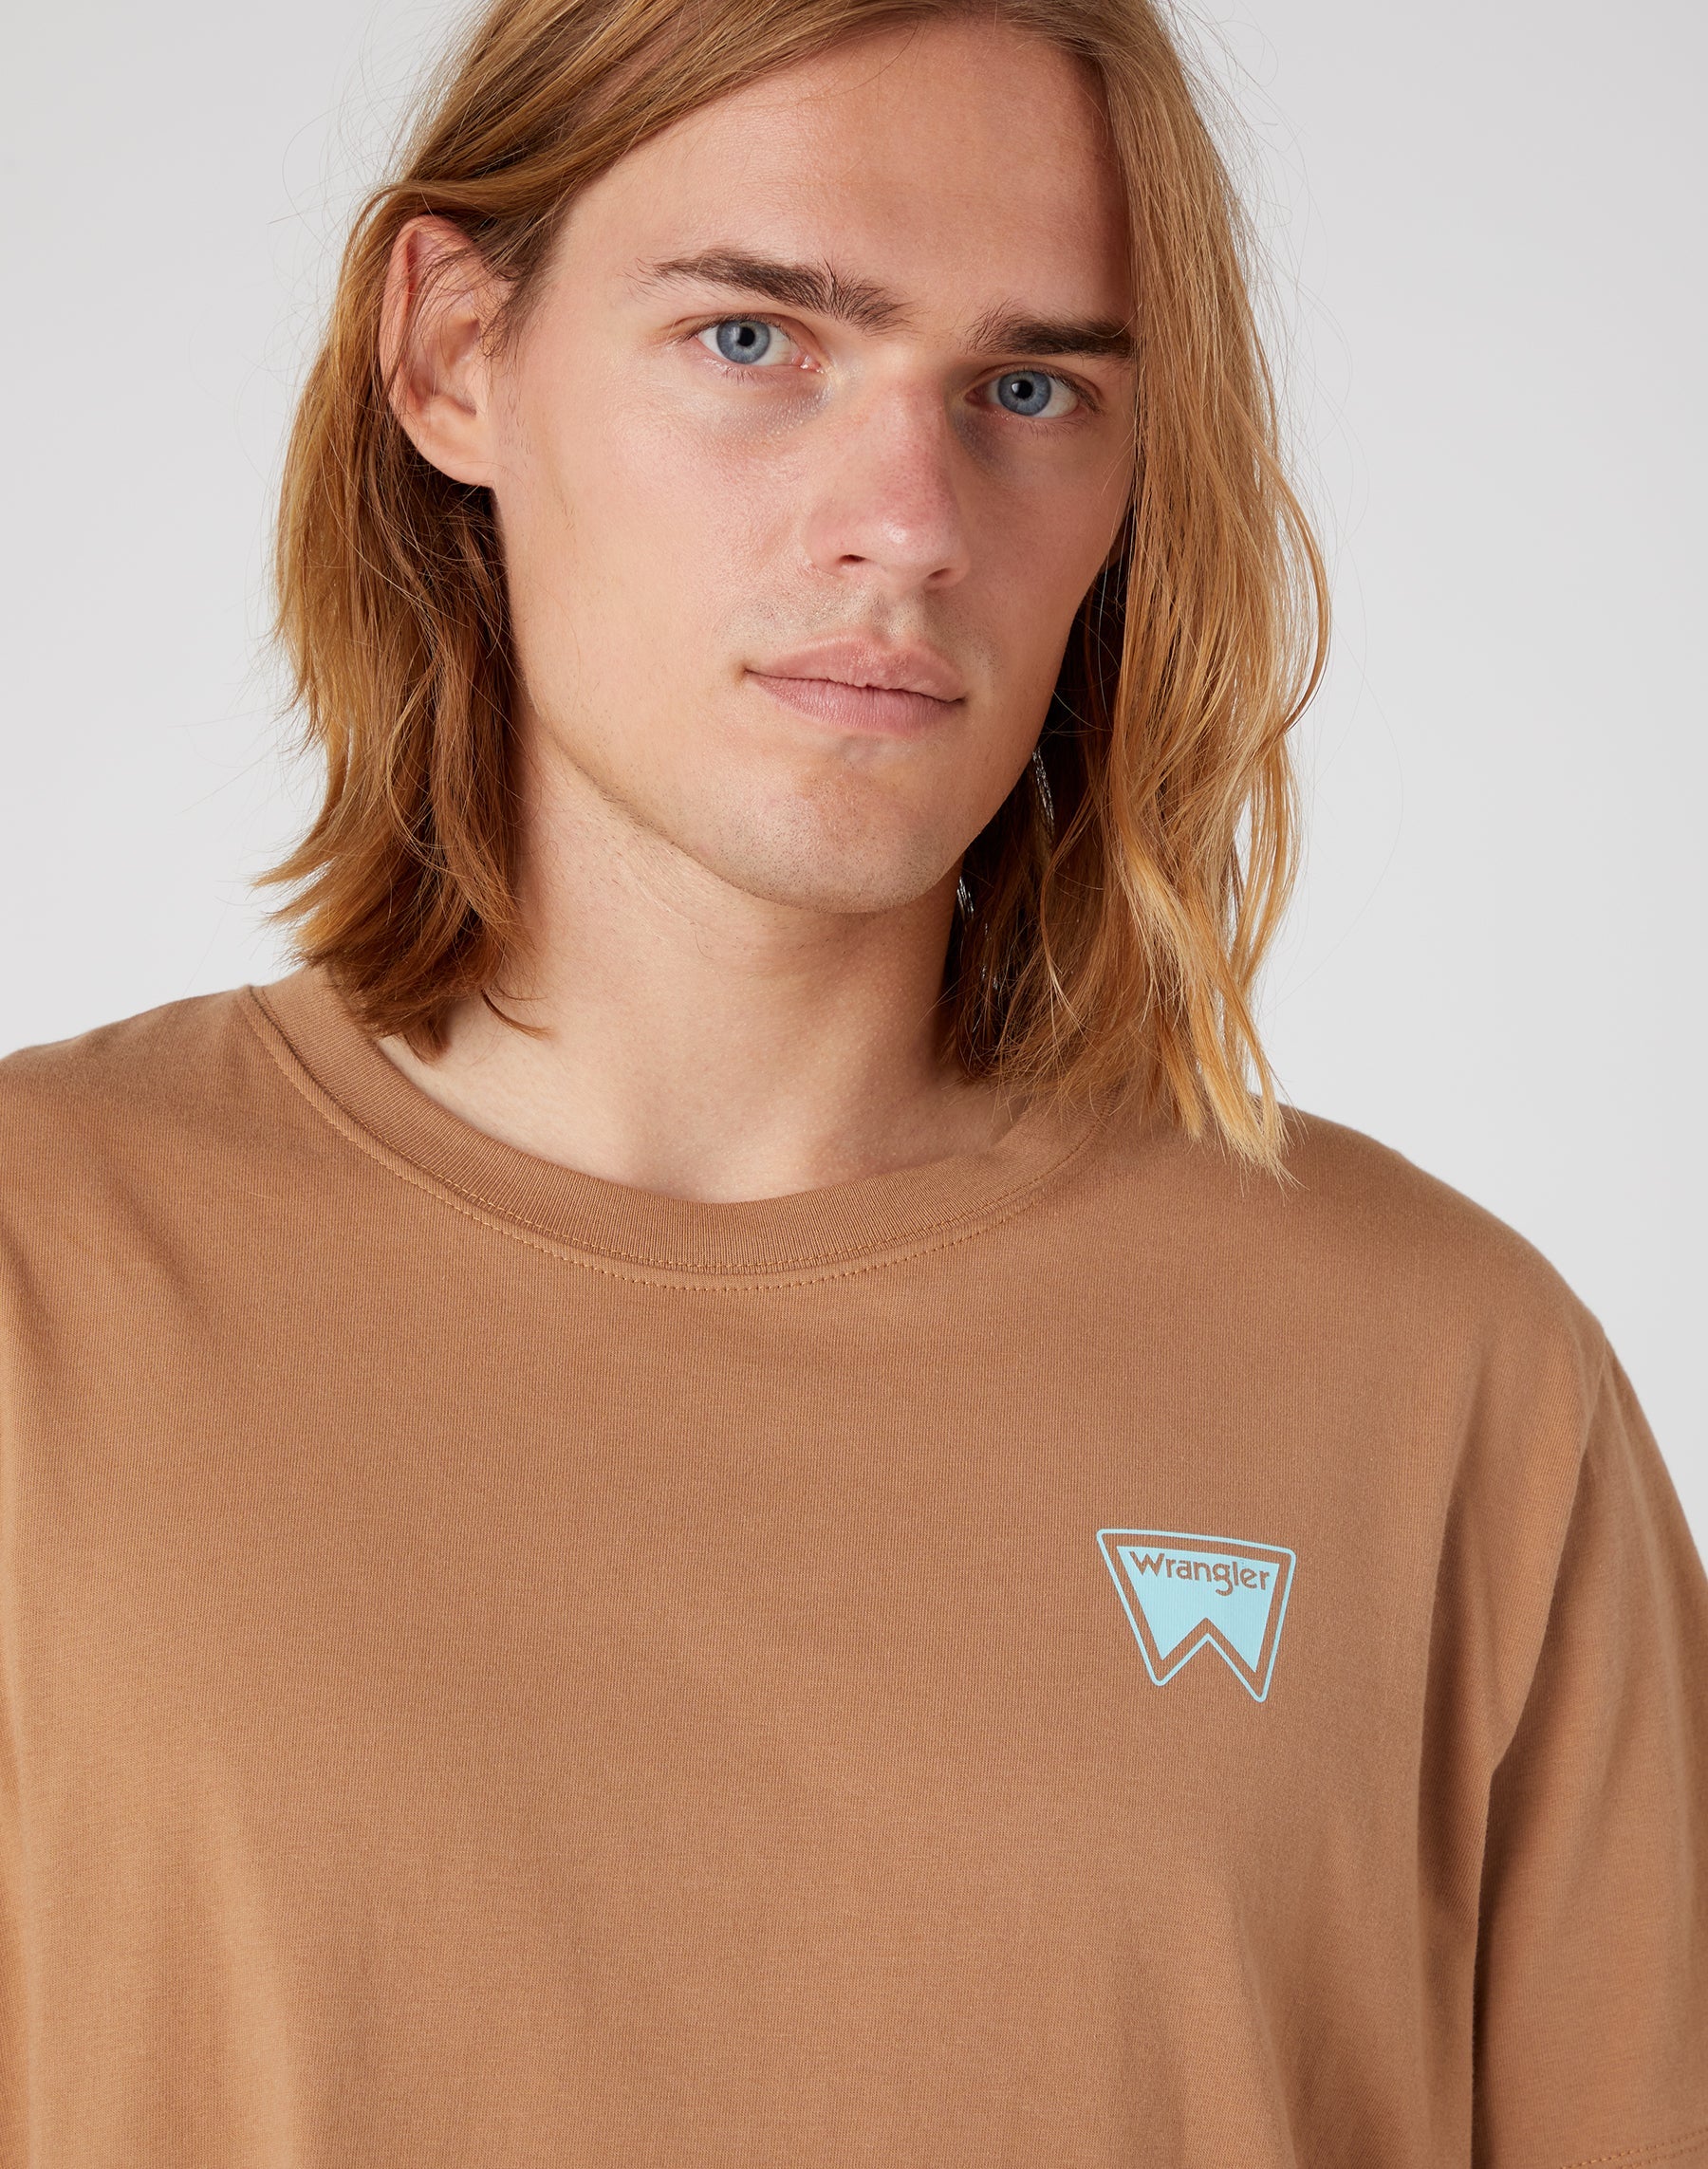 Graphic Tee in Burro Brown